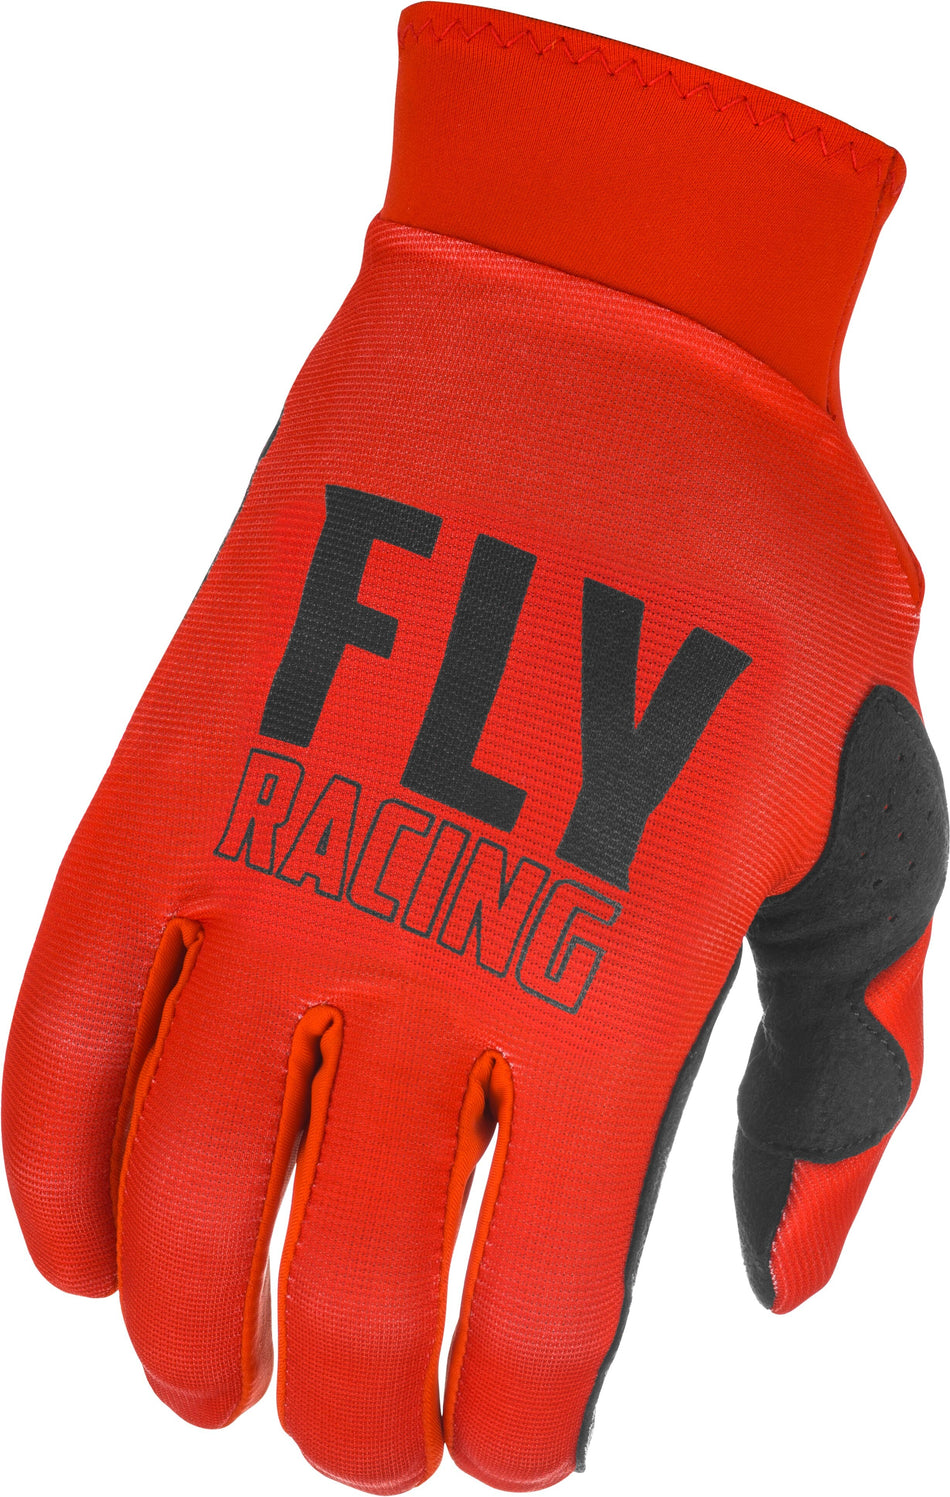 FLY RACING Youth Pro Lite Gloves Red/Black Yl 374-852YL